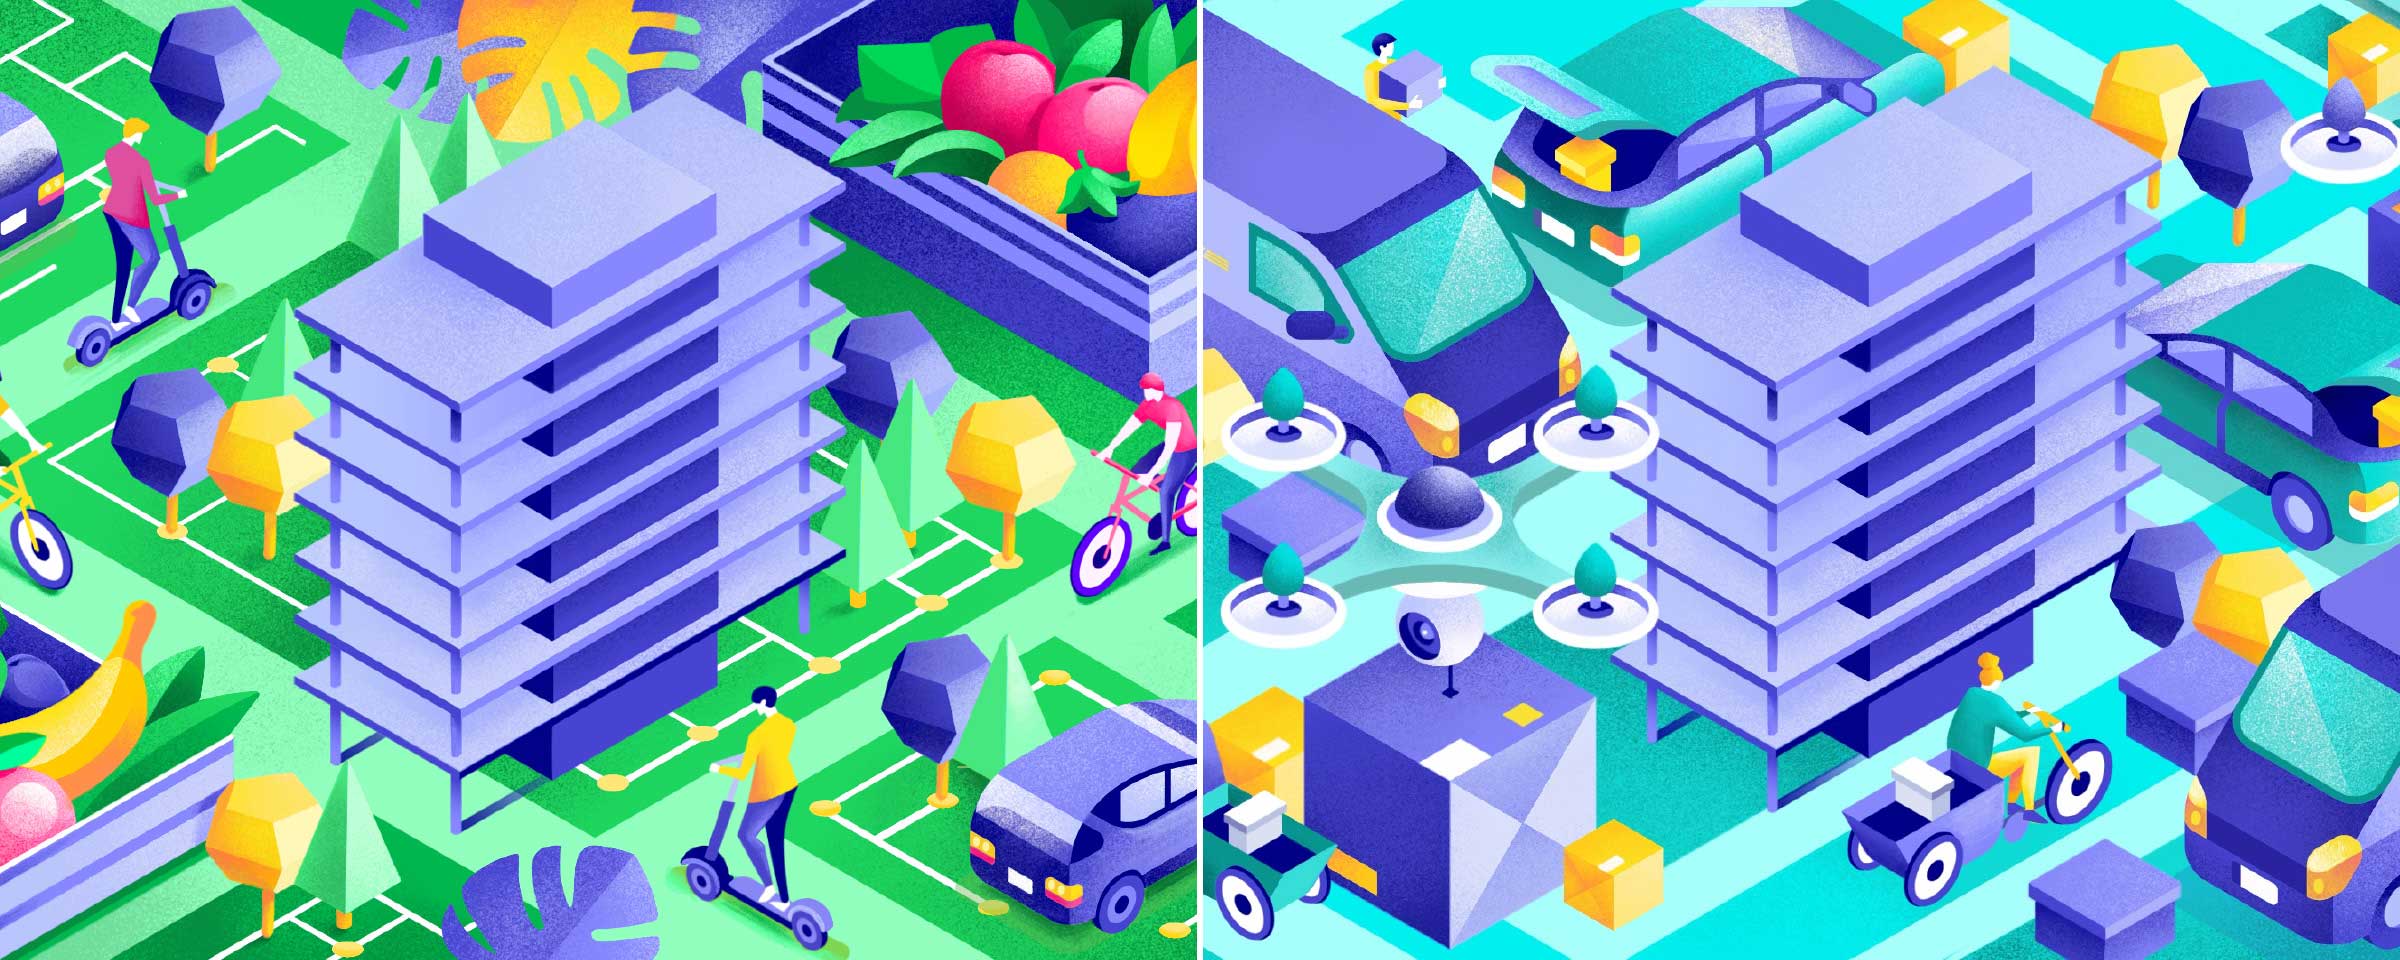 Future life and mobility illustration